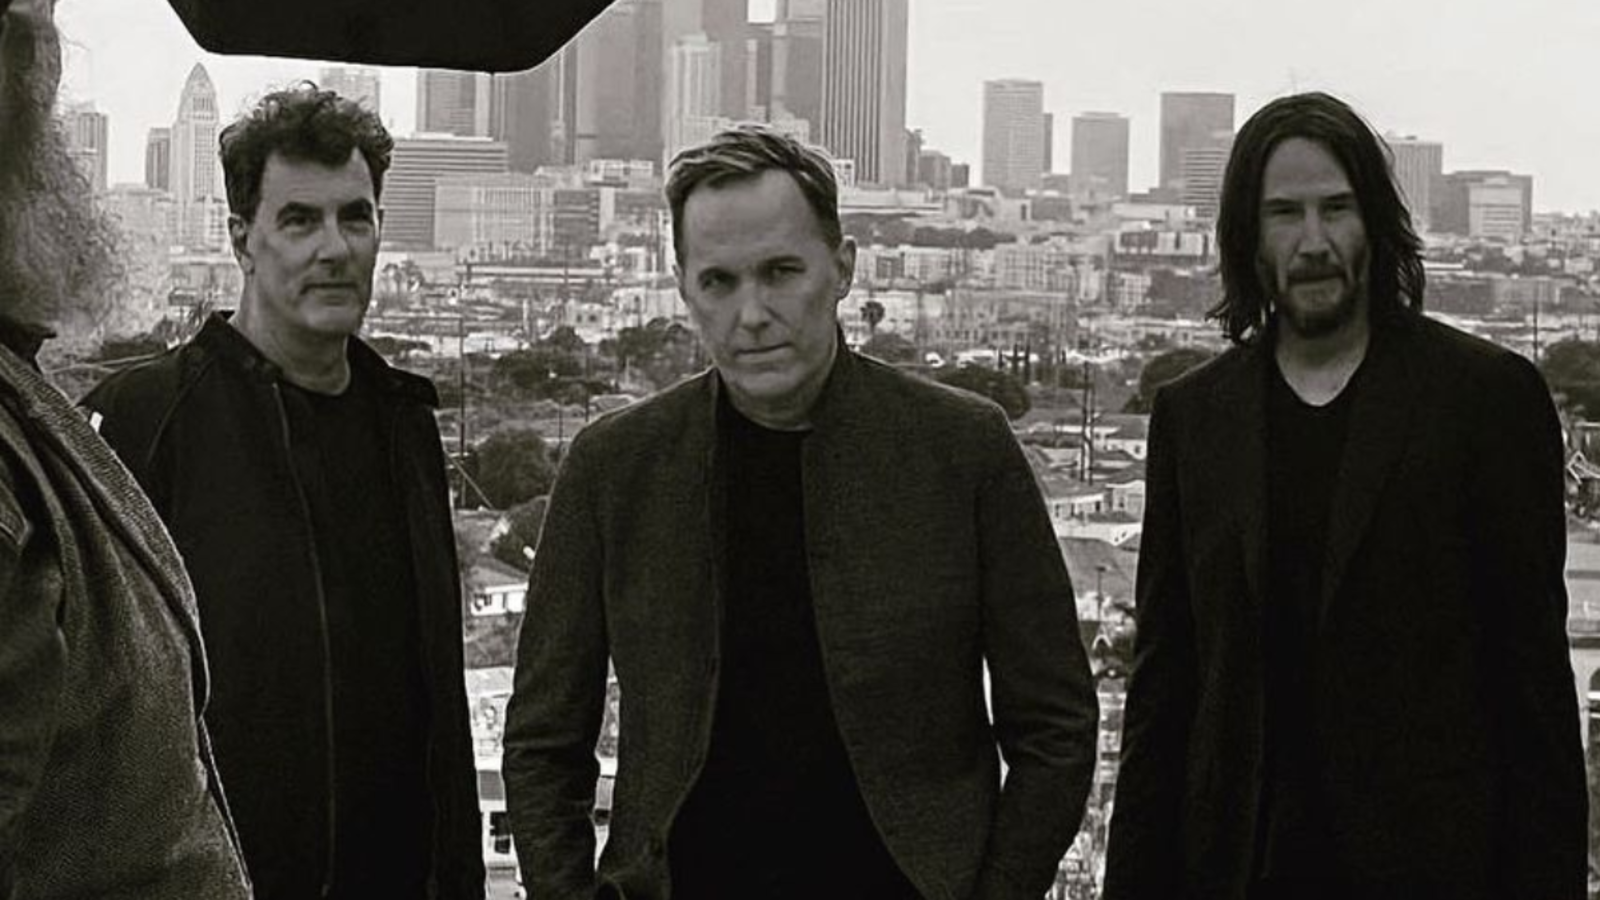 KEANU REEVES' grunge band DOGSTAR prepping first new music in 23 years